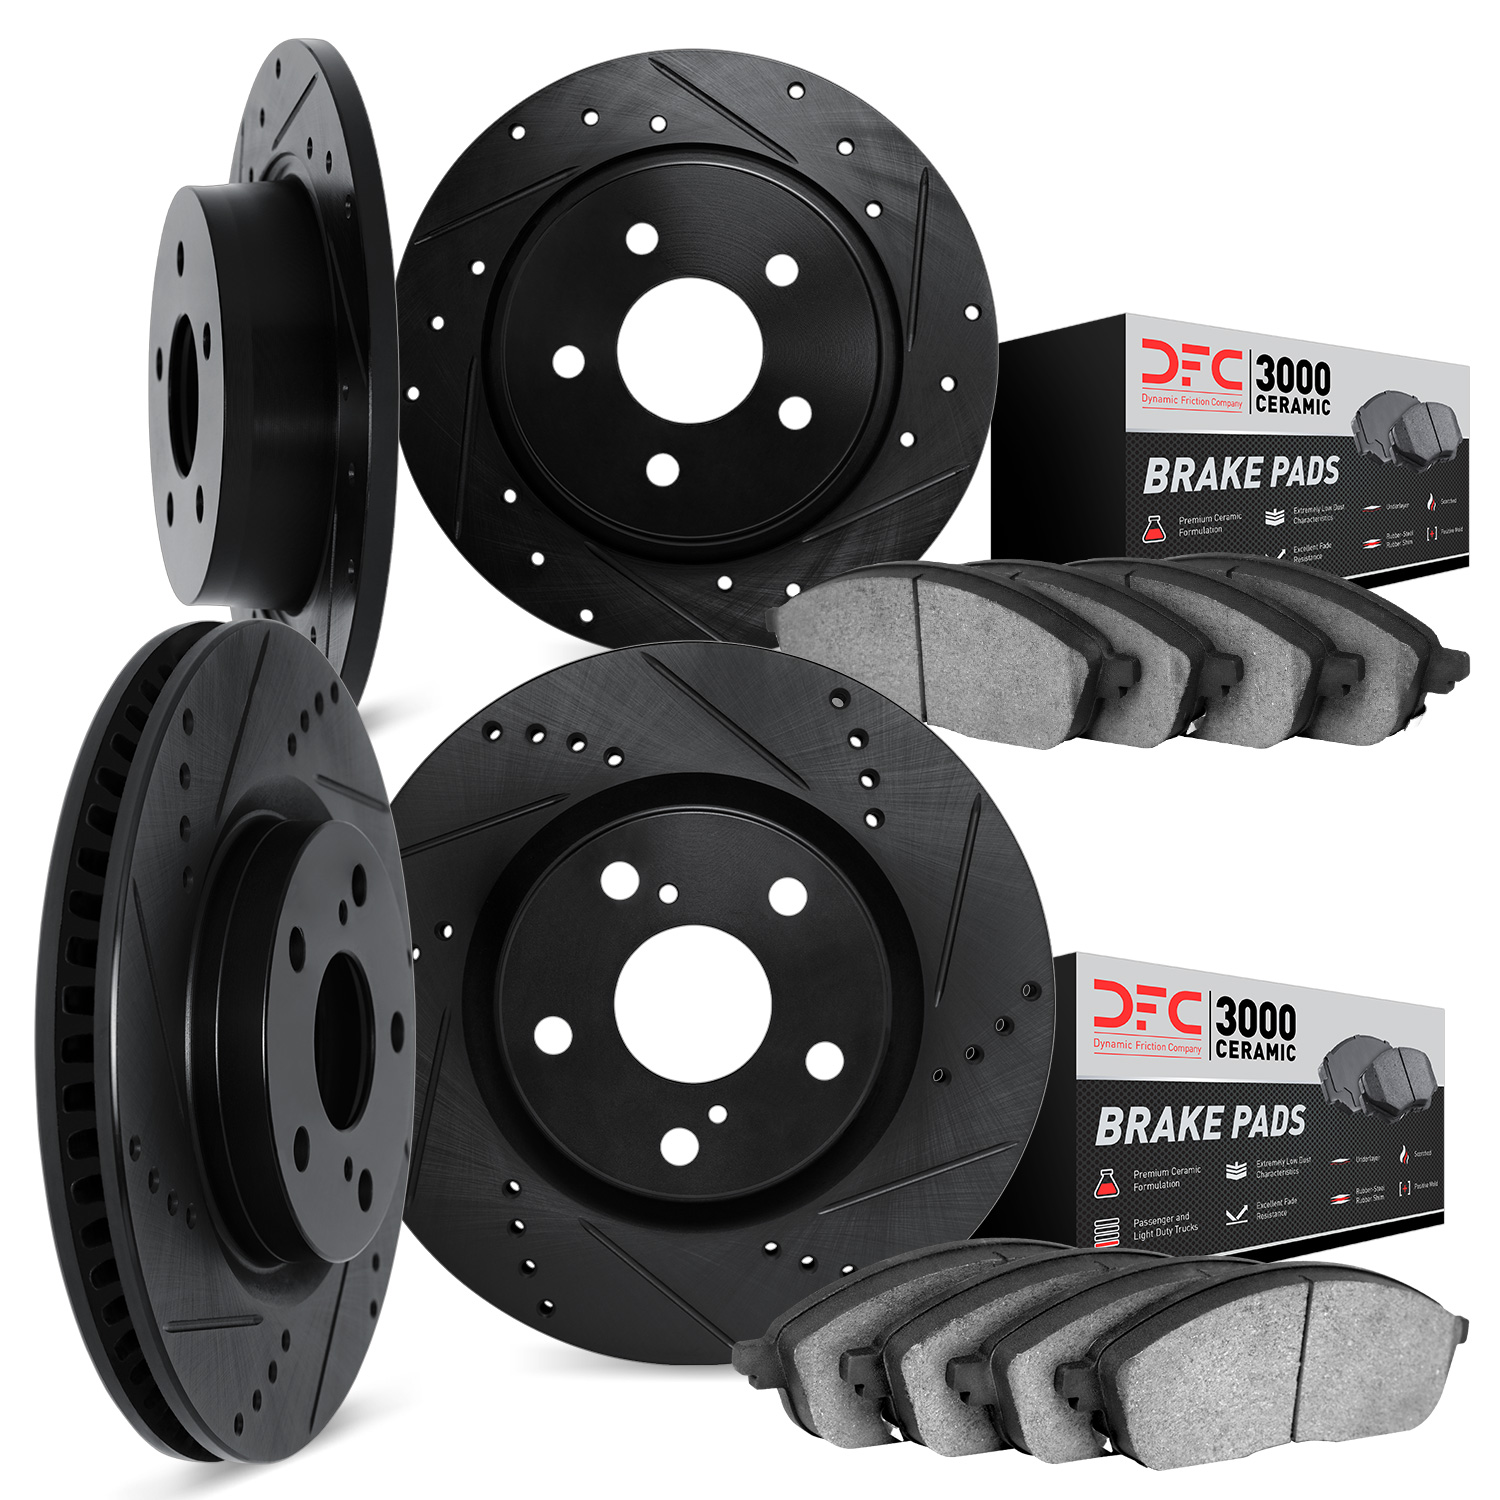 8304-59021 Drilled/Slotted Brake Rotors with 3000-Series Ceramic Brake Pads Kit [Black], 1997-2001 Acura/Honda, Position: Front